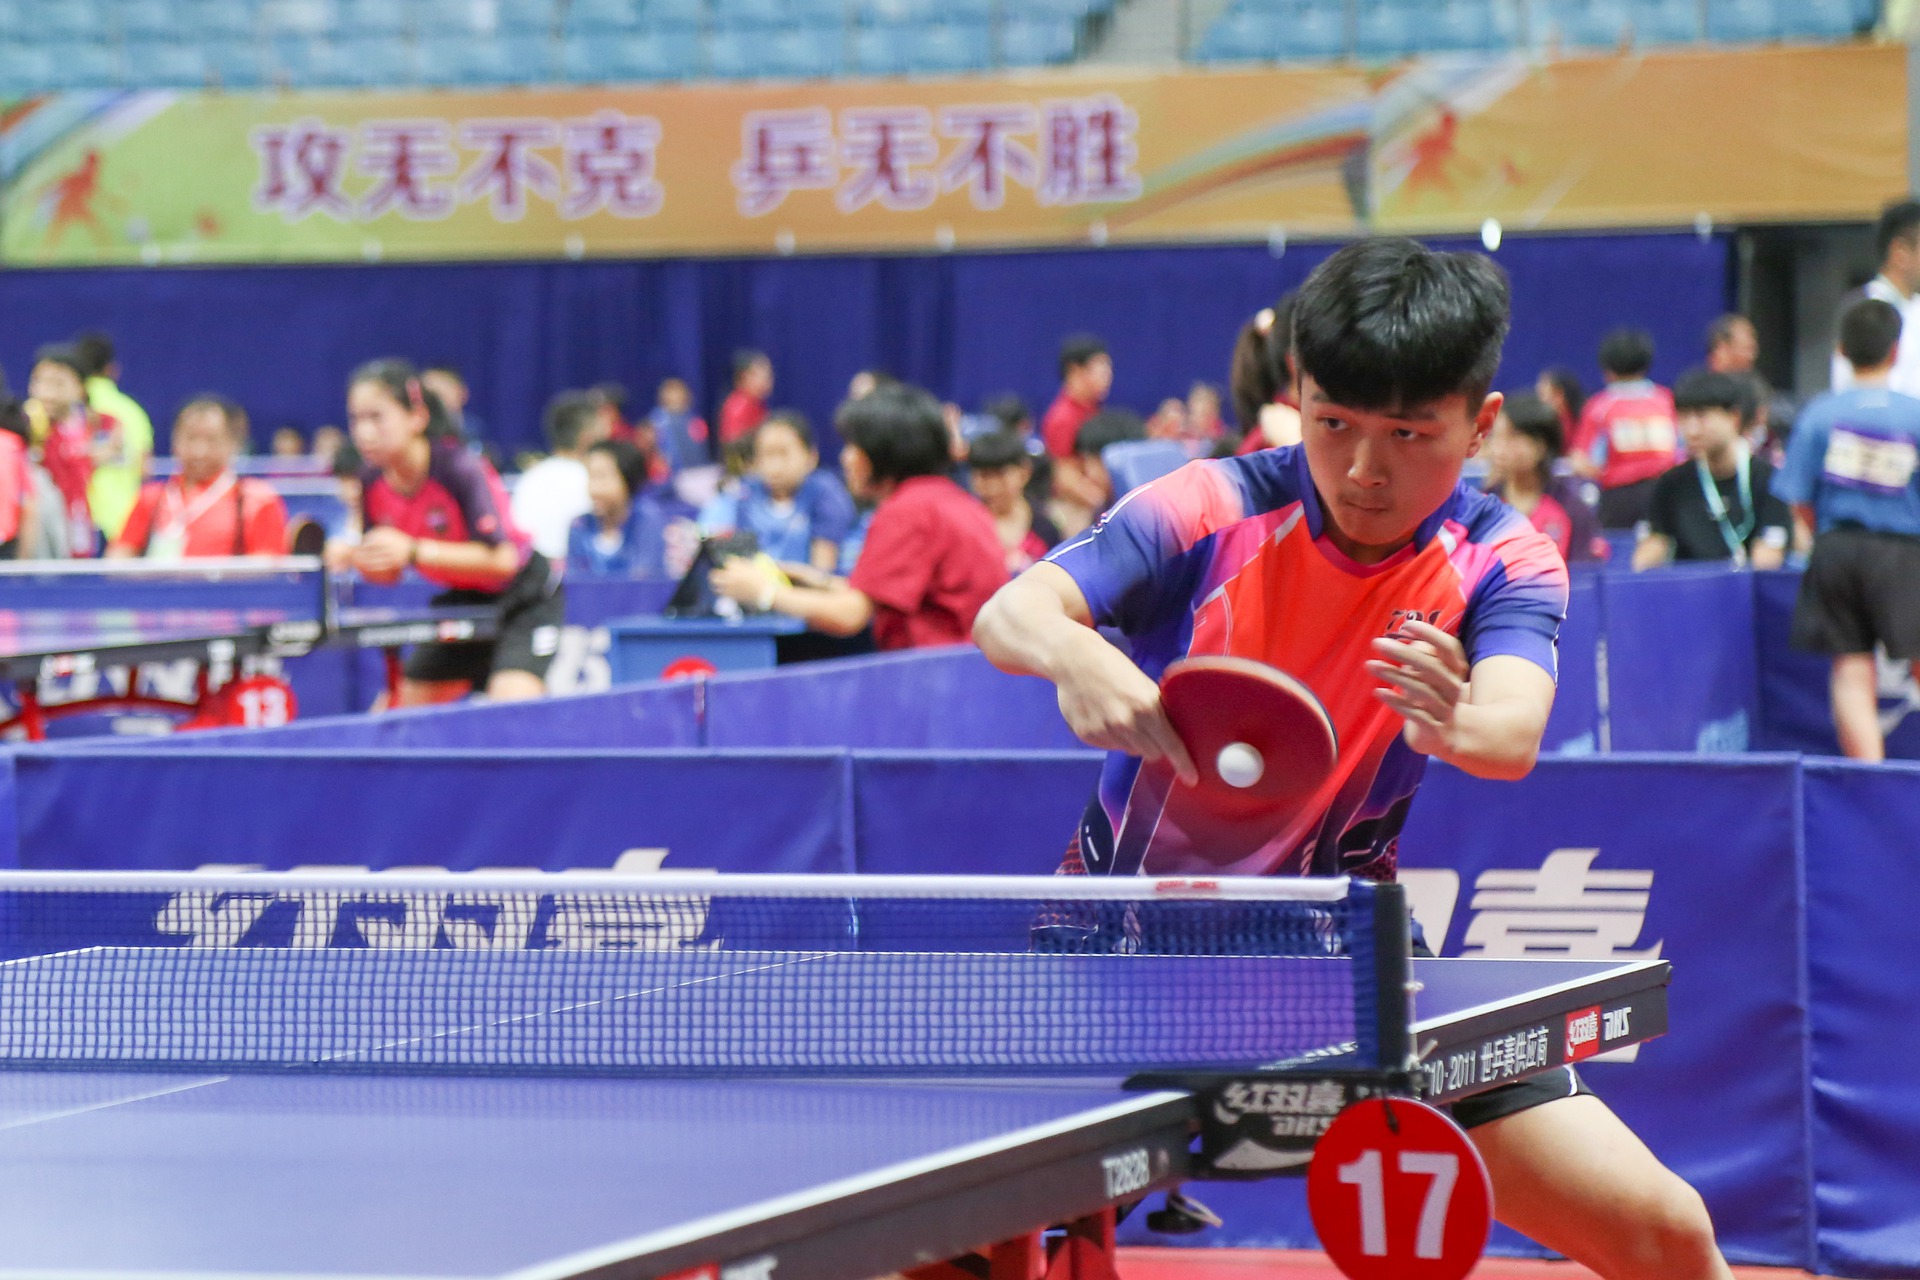 HALL OF GAMES OFFICIAL SIZE WOOD TABLE TENNIS TABLE